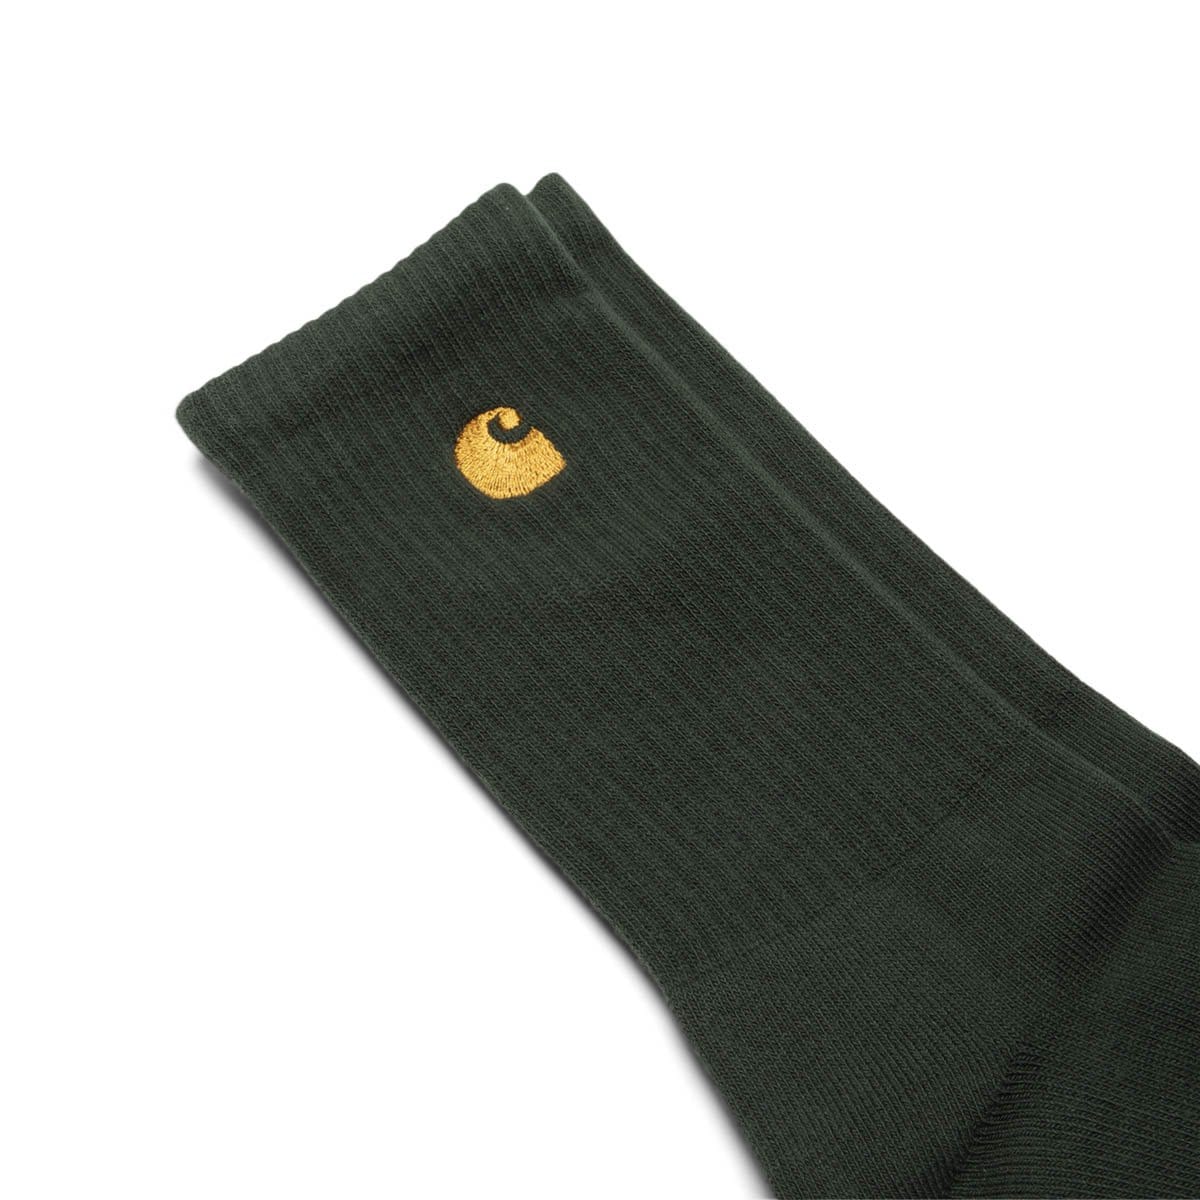 Carhartt W.I.P. Bags & Accessories BOTTLE GREEN/GOLD / OS CHASE SOCKS